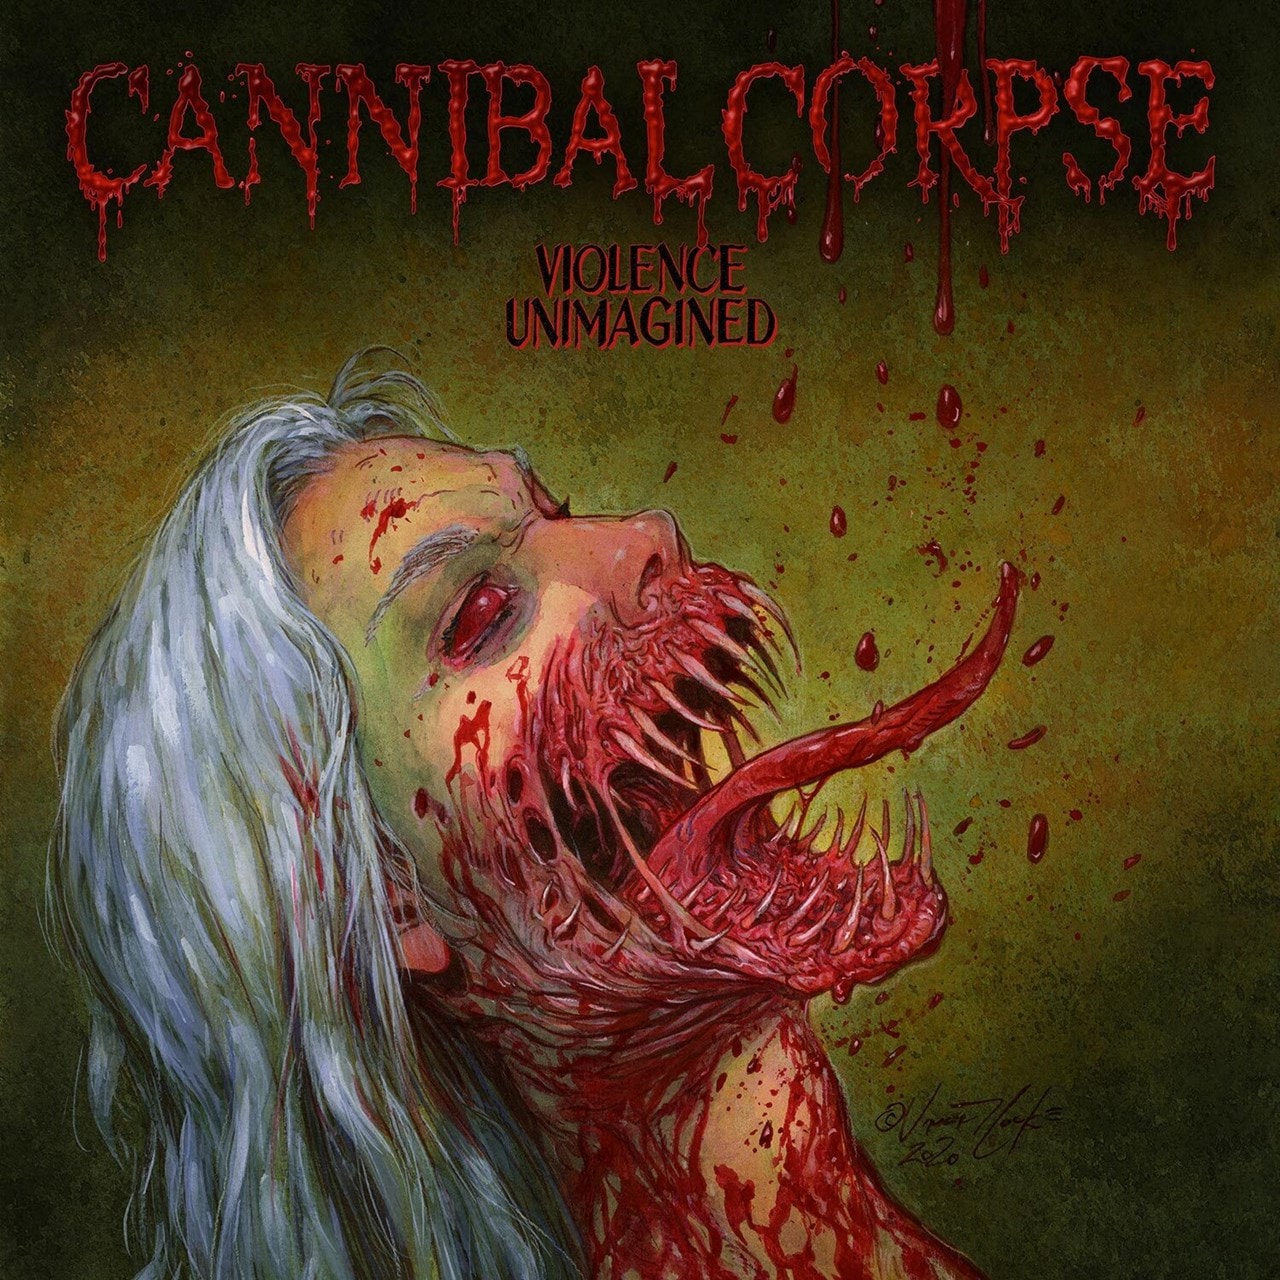 CANNIBAL CORPSE - VIOLENCE UNIMAGINED, Vinyl